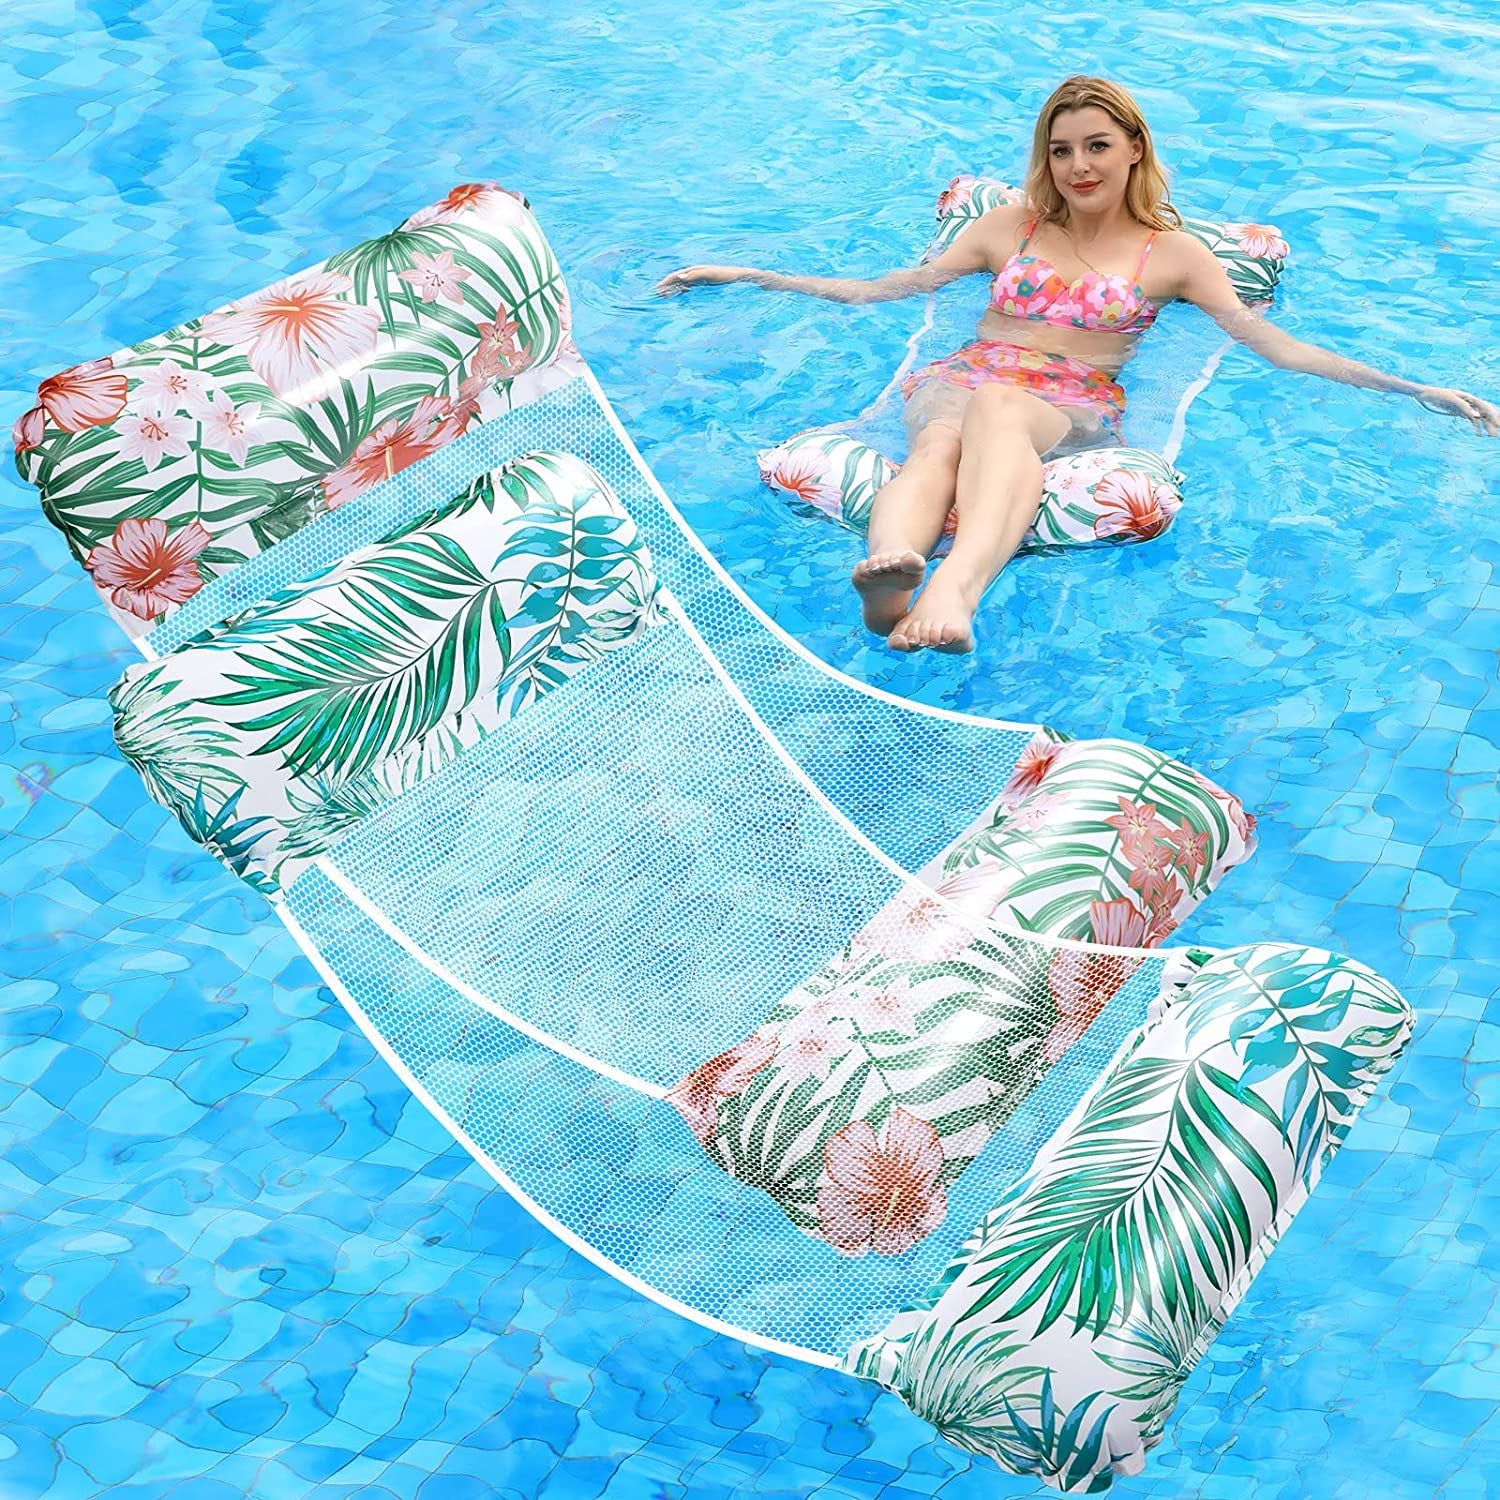 Pool Floats - 2 Pack Water Hammock Swimming Pool Float, Water Hammock Lounger, Inflatable Pool Floats, 4-in-1 Swimming Pool Floaties (Saddle, Lounge Chair, Hammock, Drifter), Pool Floats for Adult